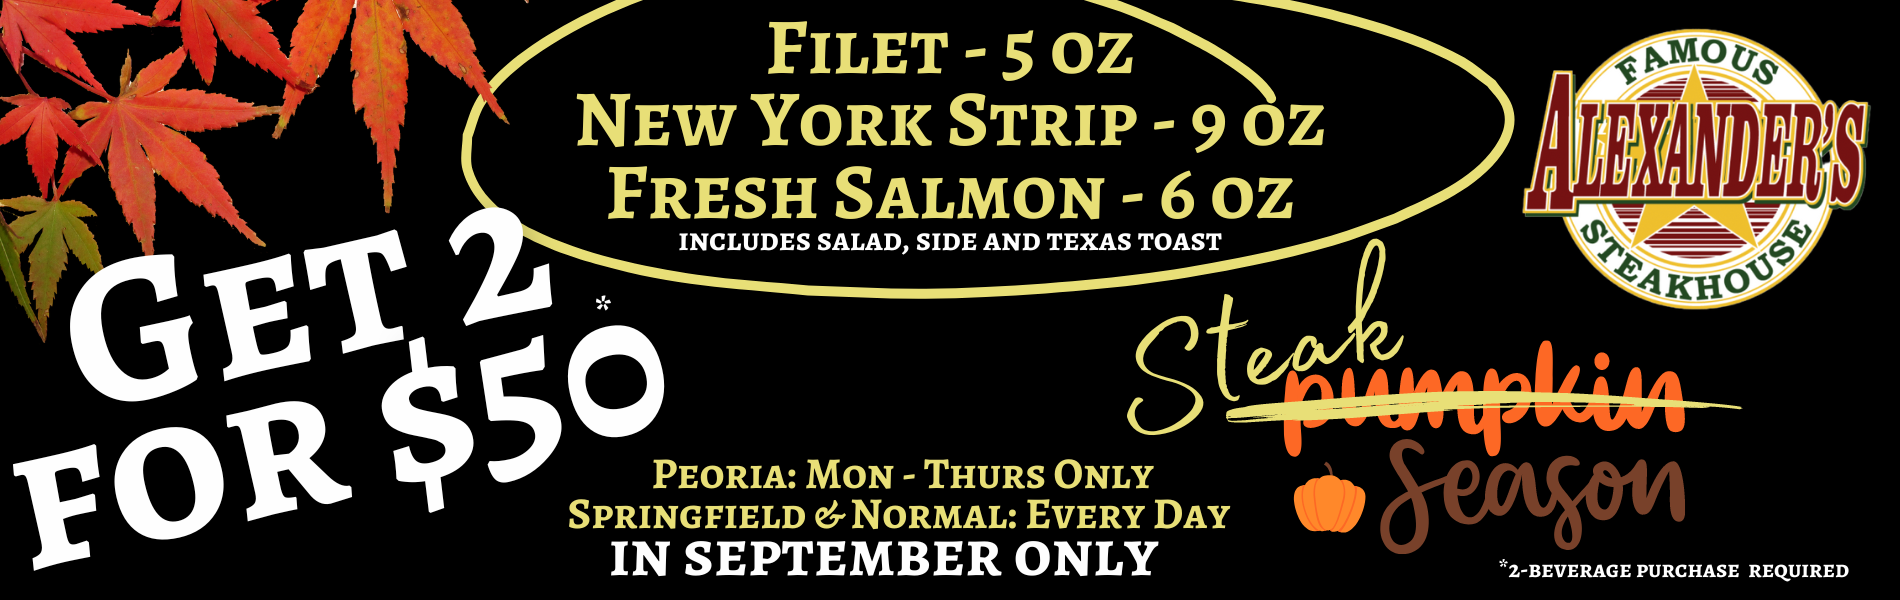 Advertisement for September Special at Alexander's Steakhouse